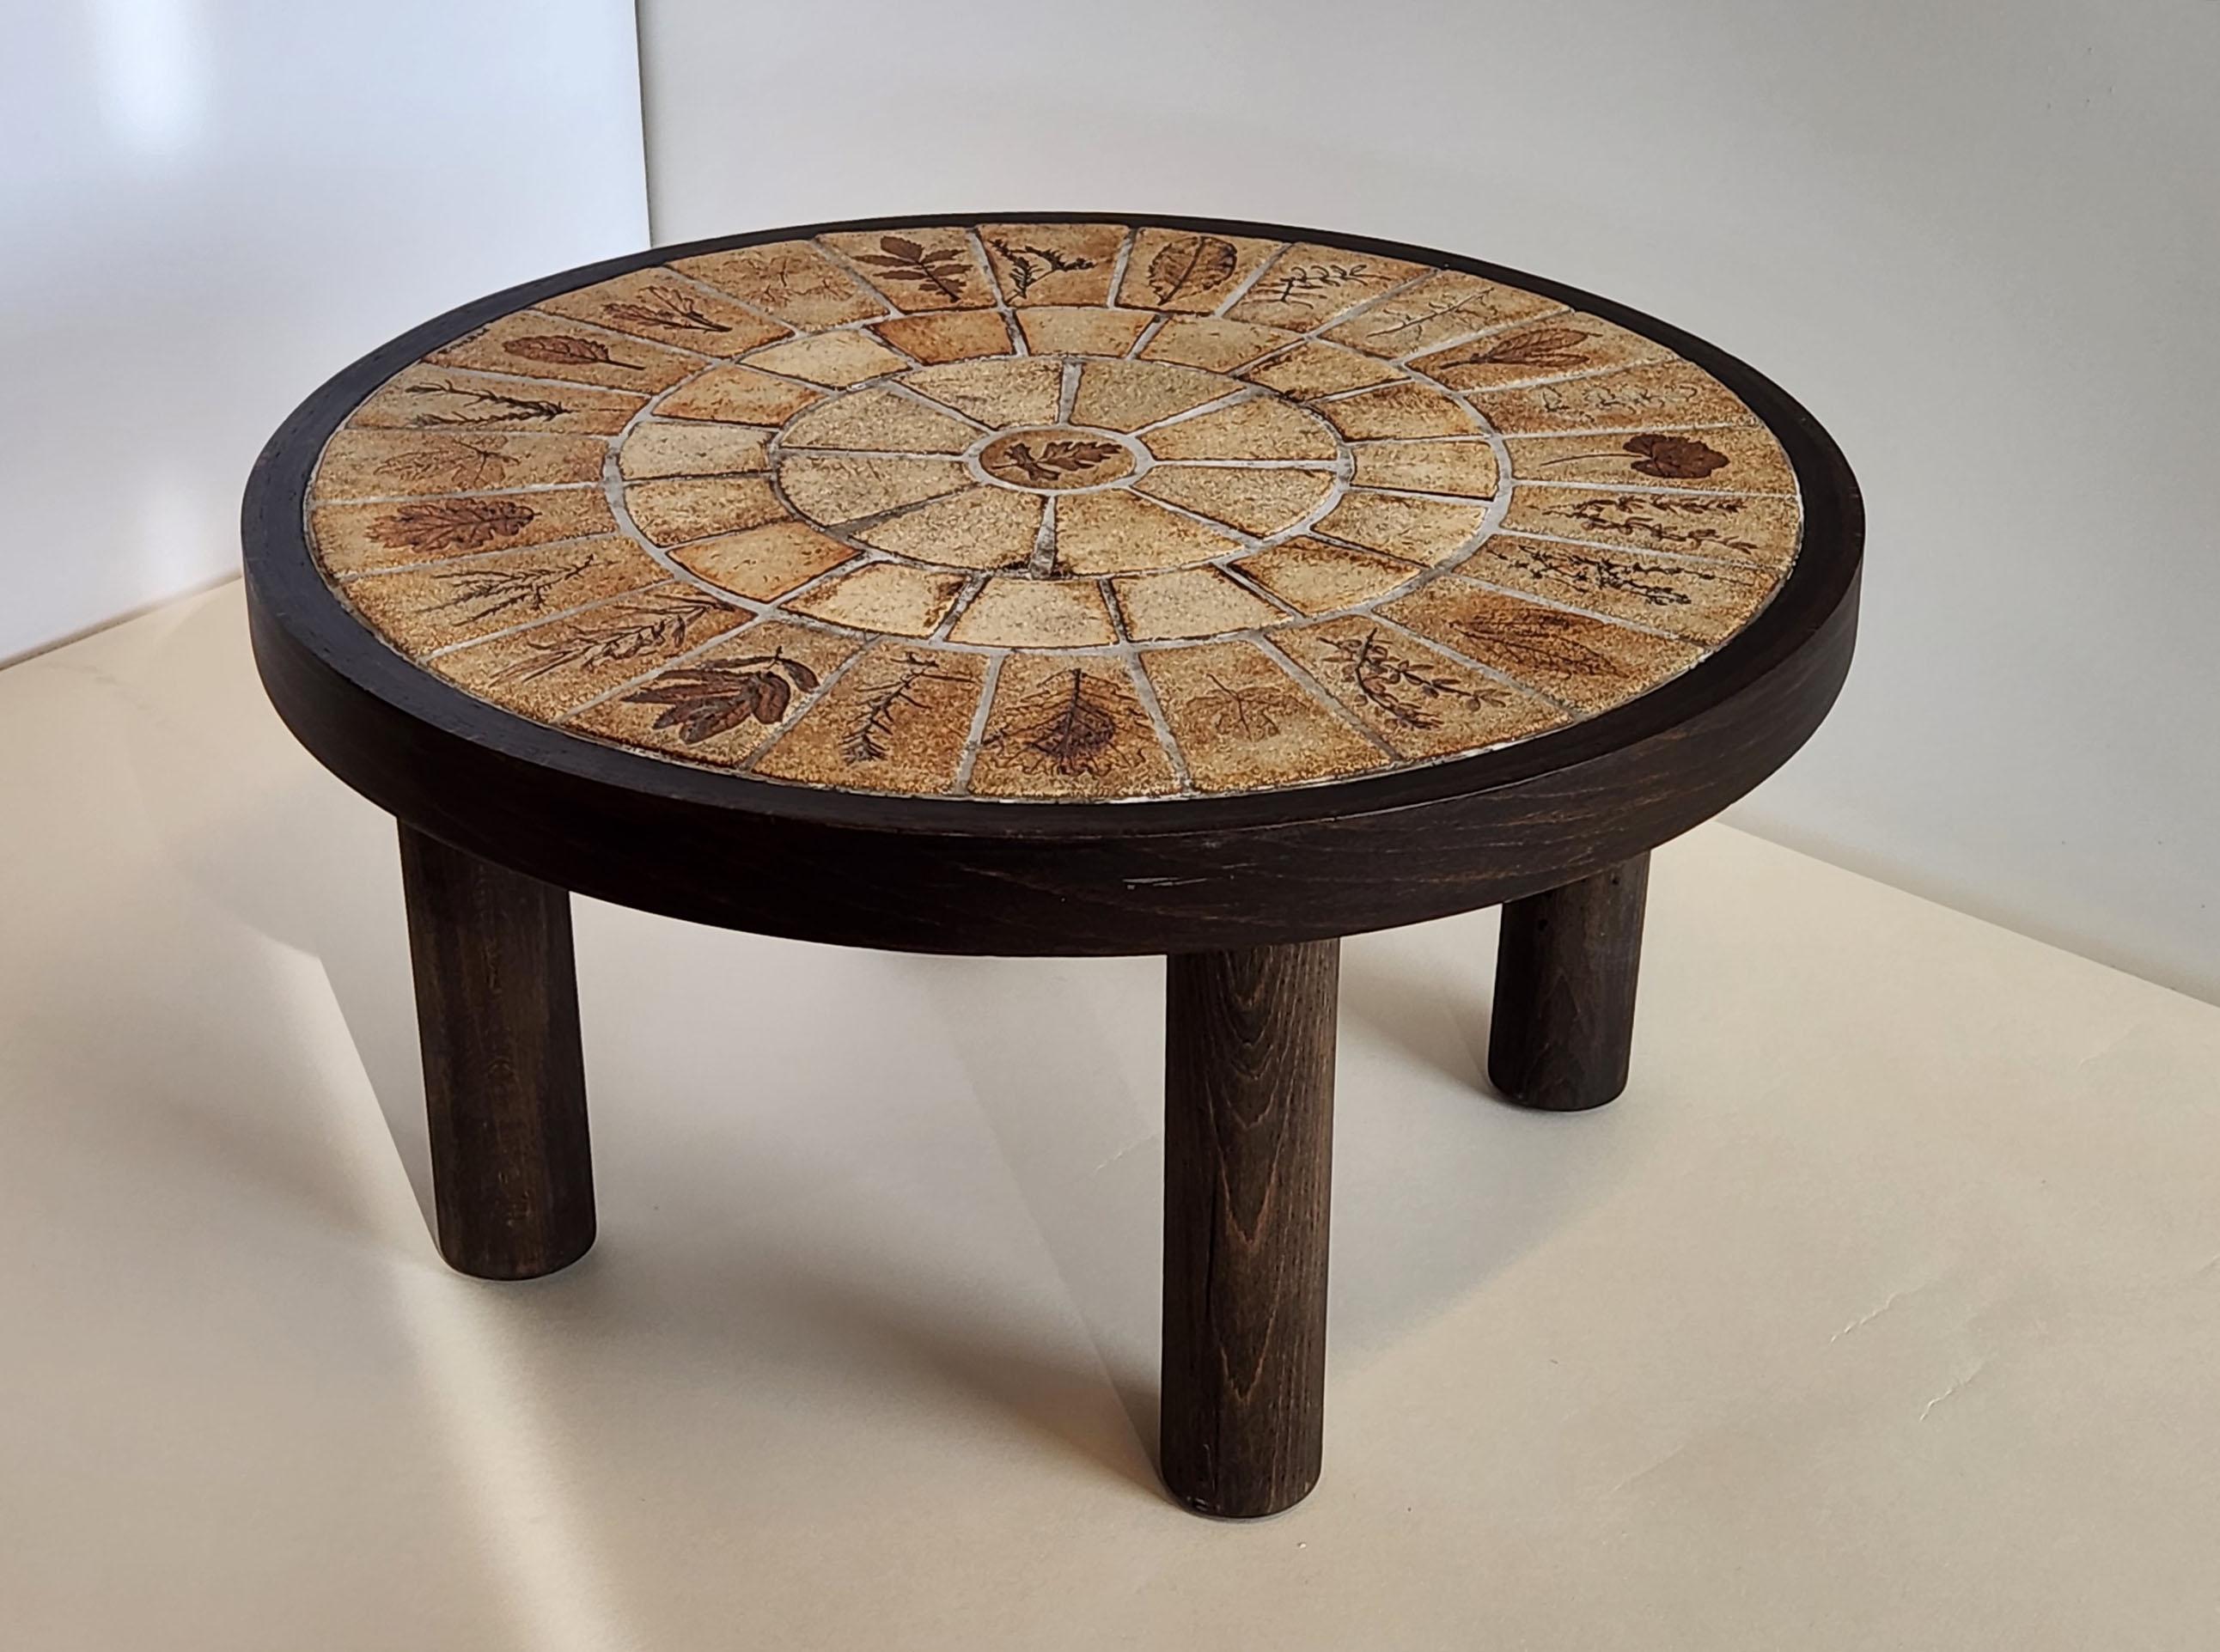 Round end table with the famous Roger Capron Herbier tiles, designed  from 1968 to 1982.

The handcrafted Garrigue tiles produced by a technique in which real leaves were pressed into the clay and, during firing, disintegrated, leaving a finely